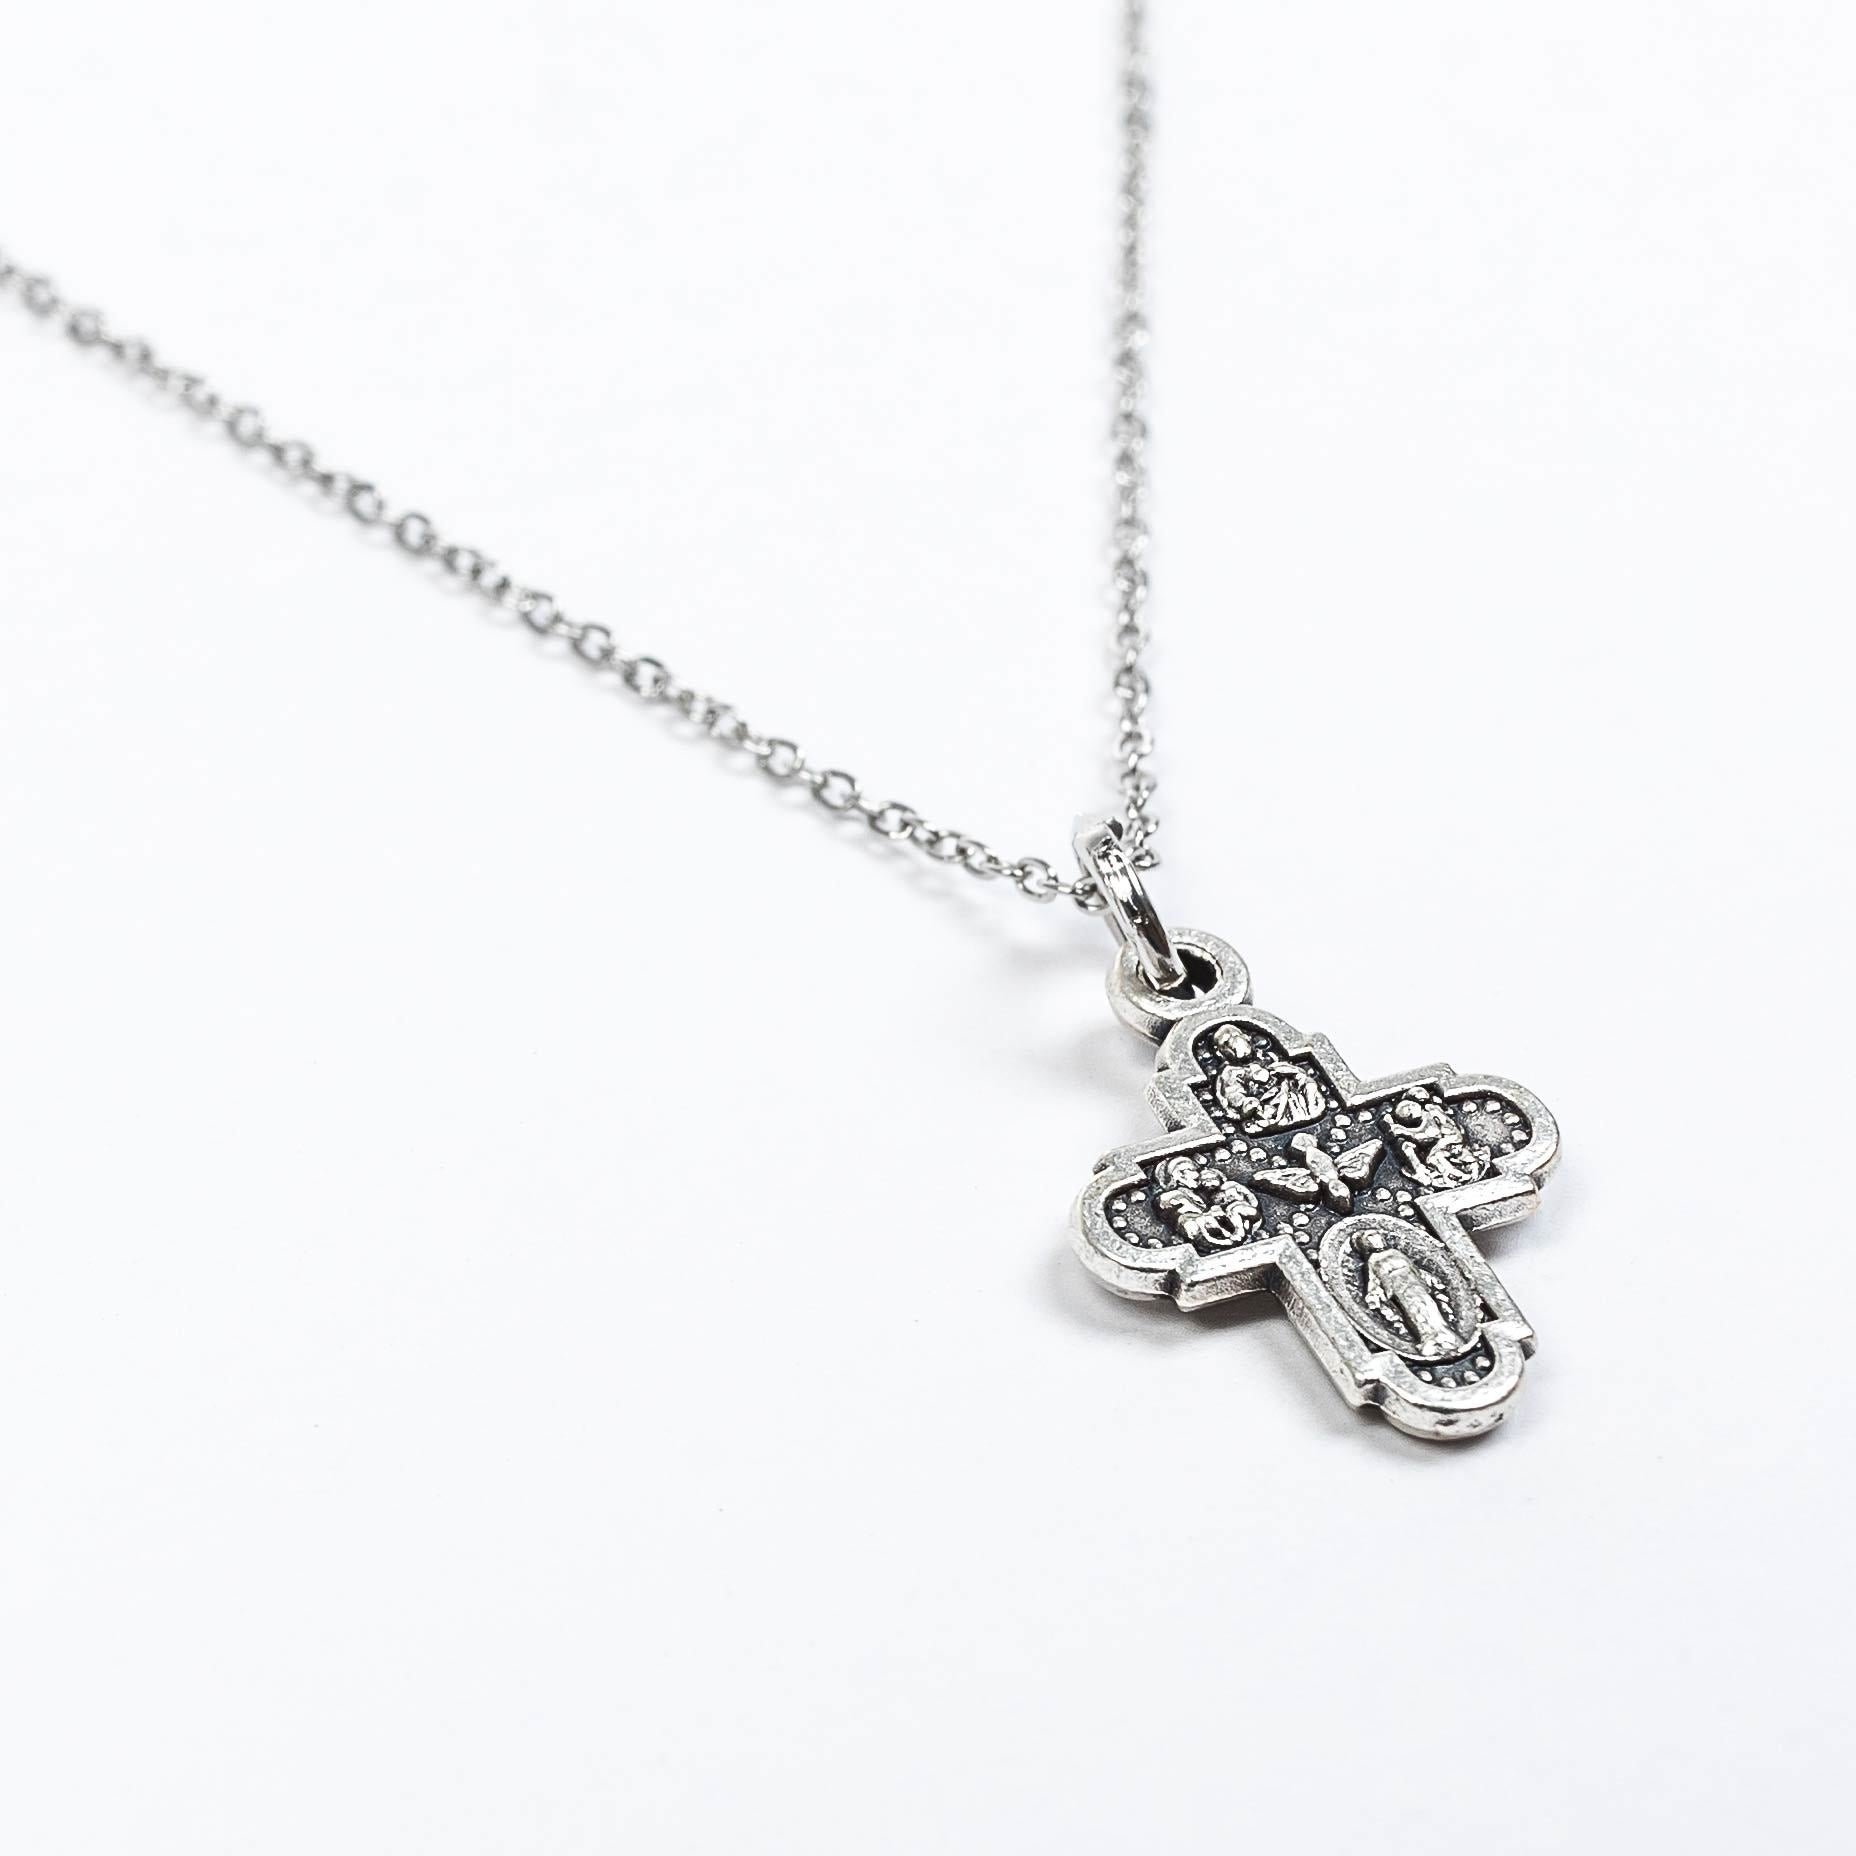 Heavenly Blessings Necklace